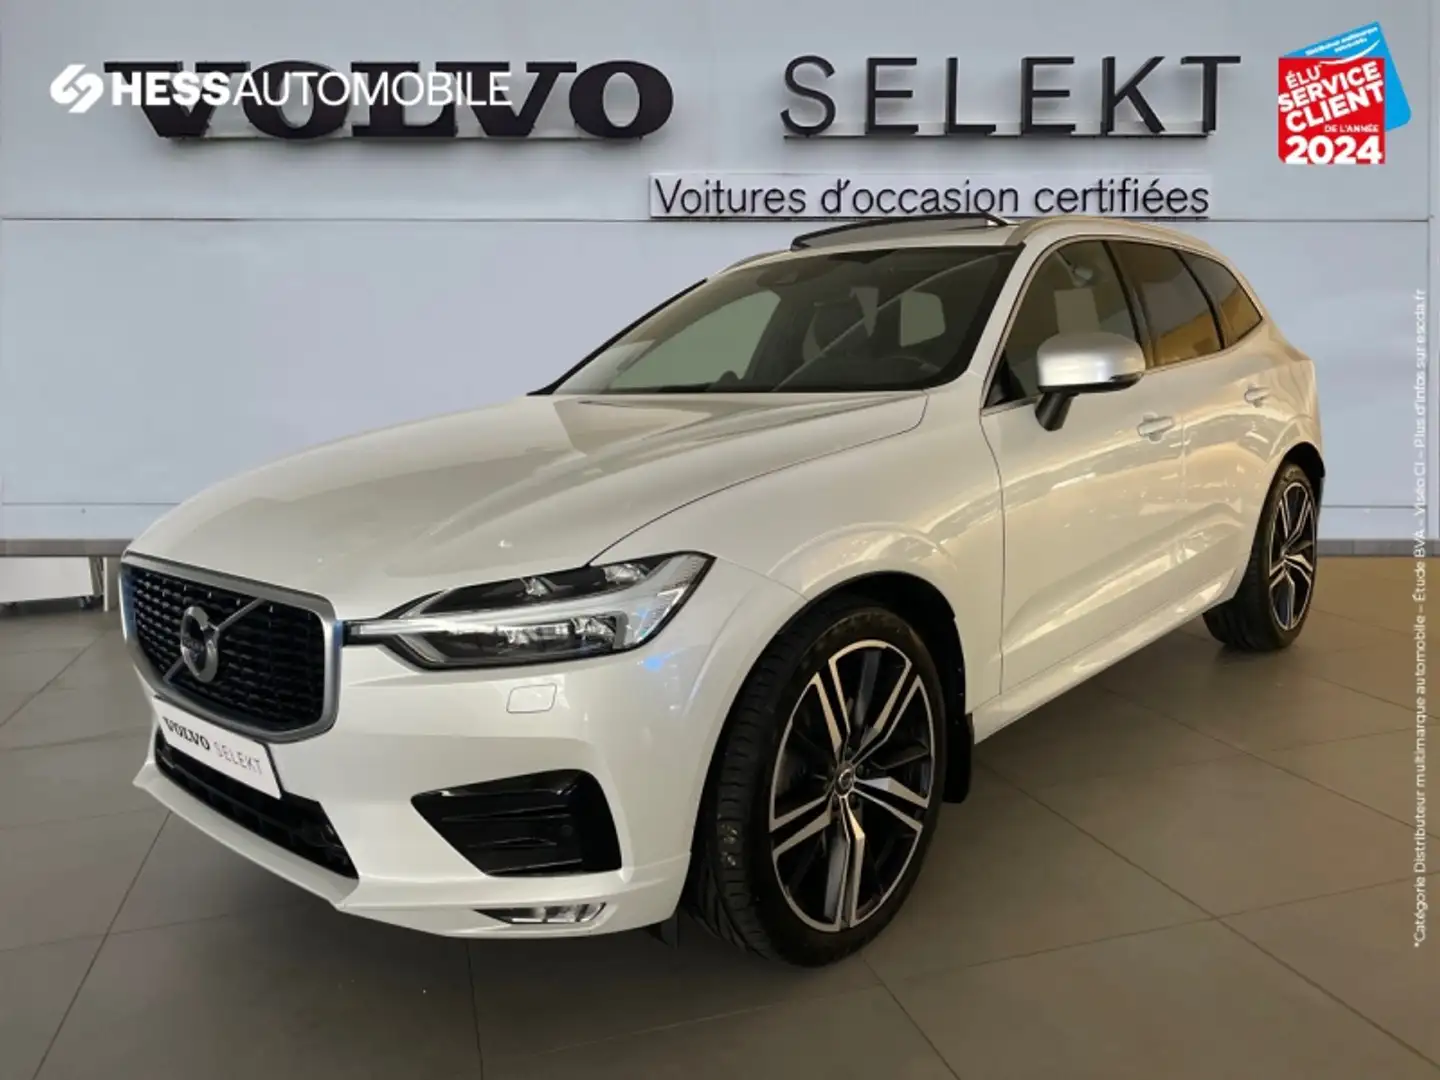 Volvo XC60 T6 AWD 310ch R-Design Geartronic - 1